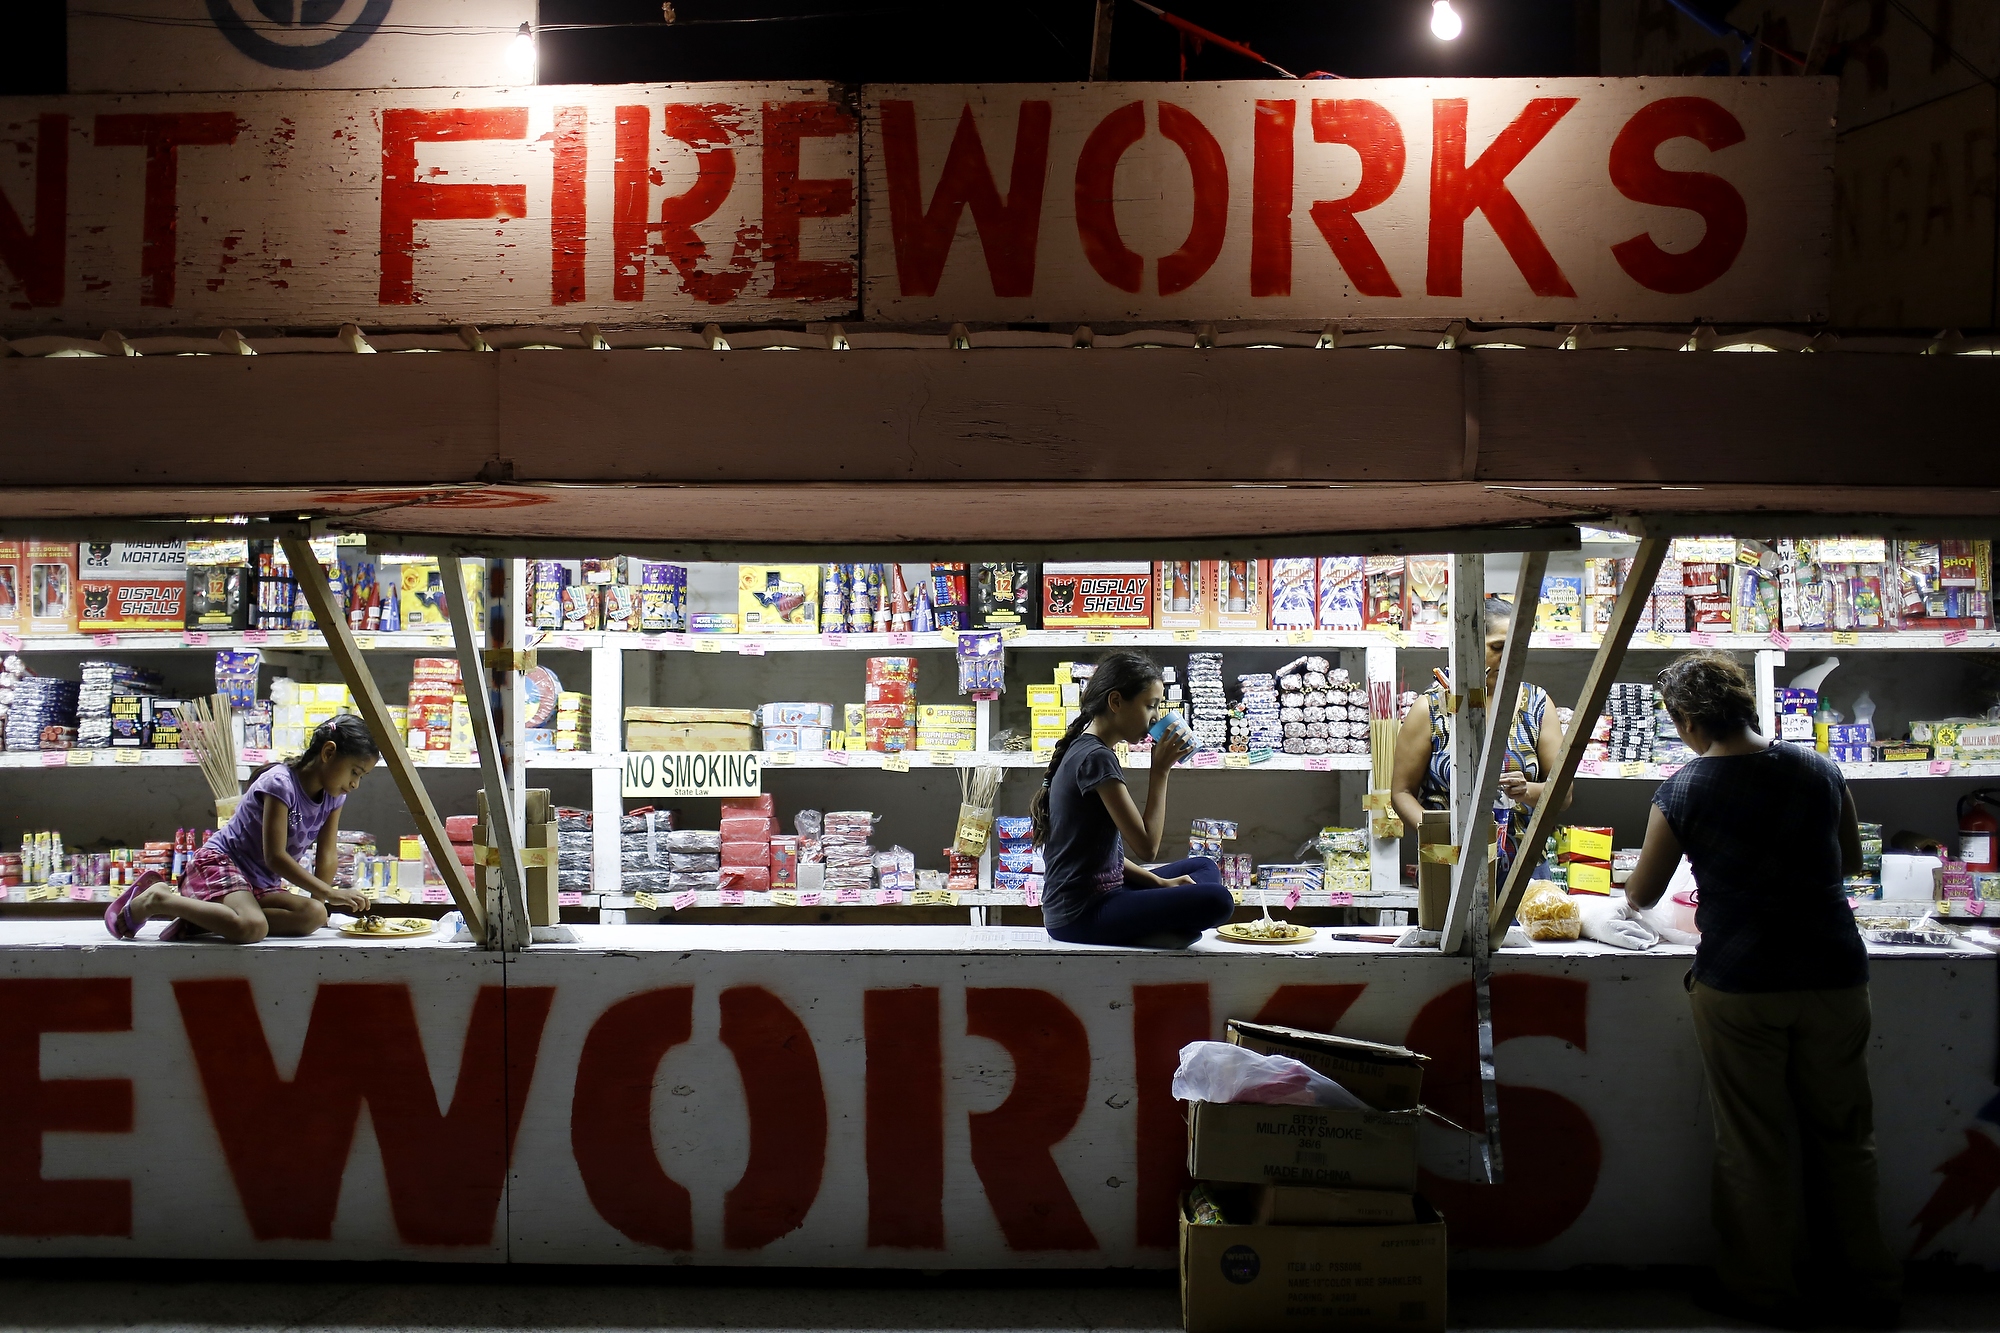 Cynthia Fuentes and Nelson Zamora have been selling fireworks since 1998.  WIth them is their daughter Elisabeth and granddaughters Briana, 11, and Jazlyn, 8, who share a meal at the fireworks stand in Hidalgo Texas, July 1, 2014.